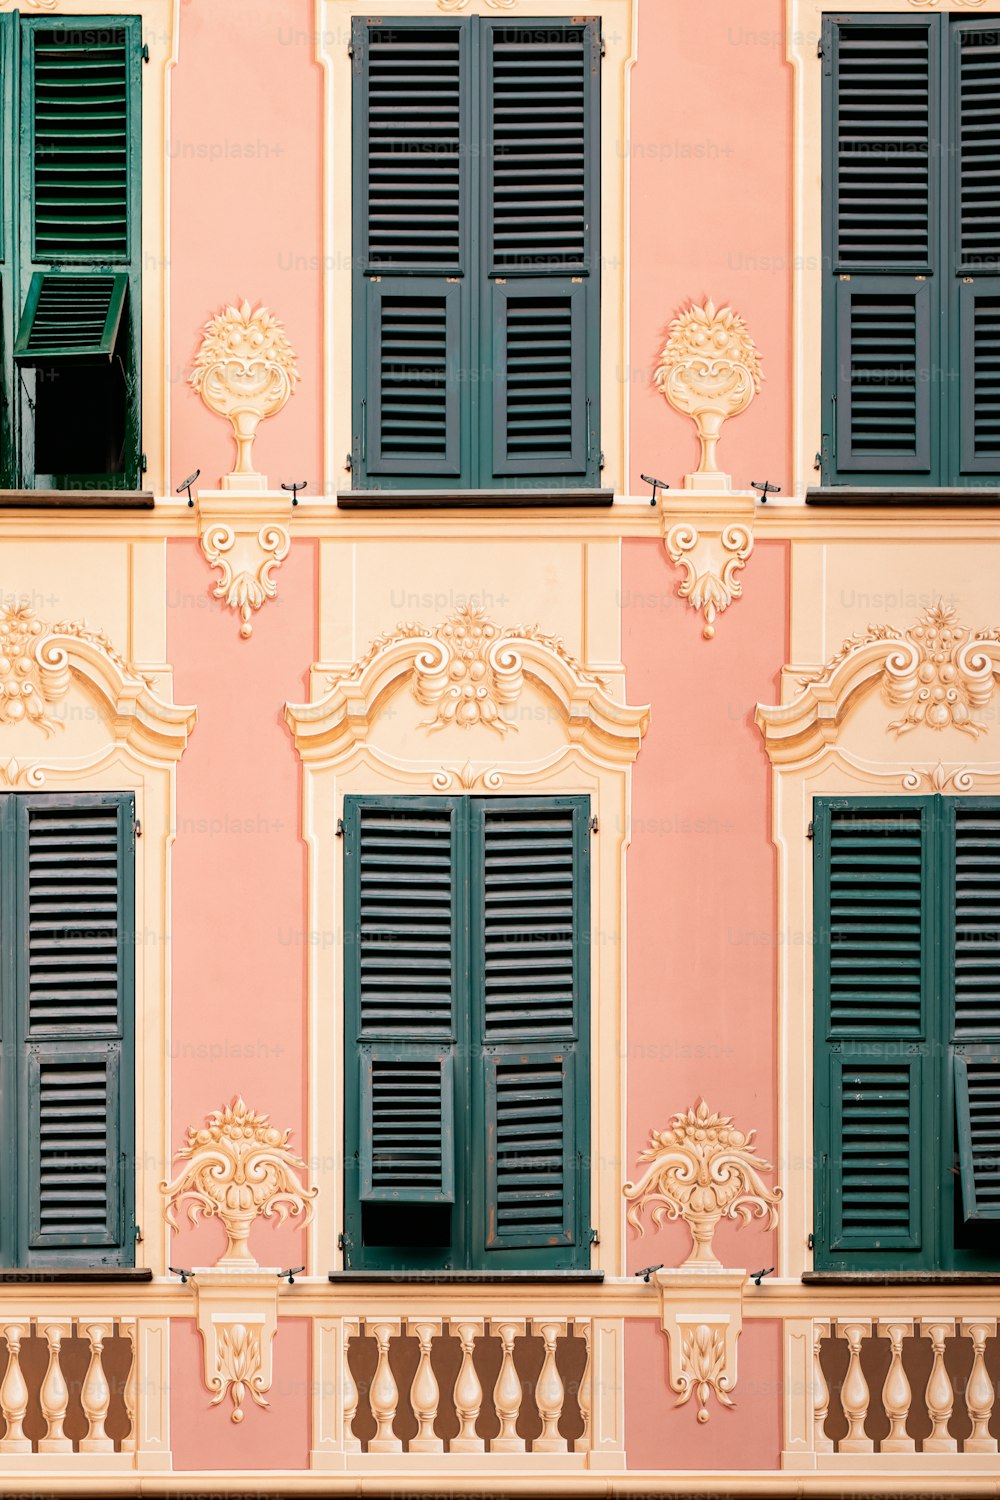 a pink building with green shutters and a clock